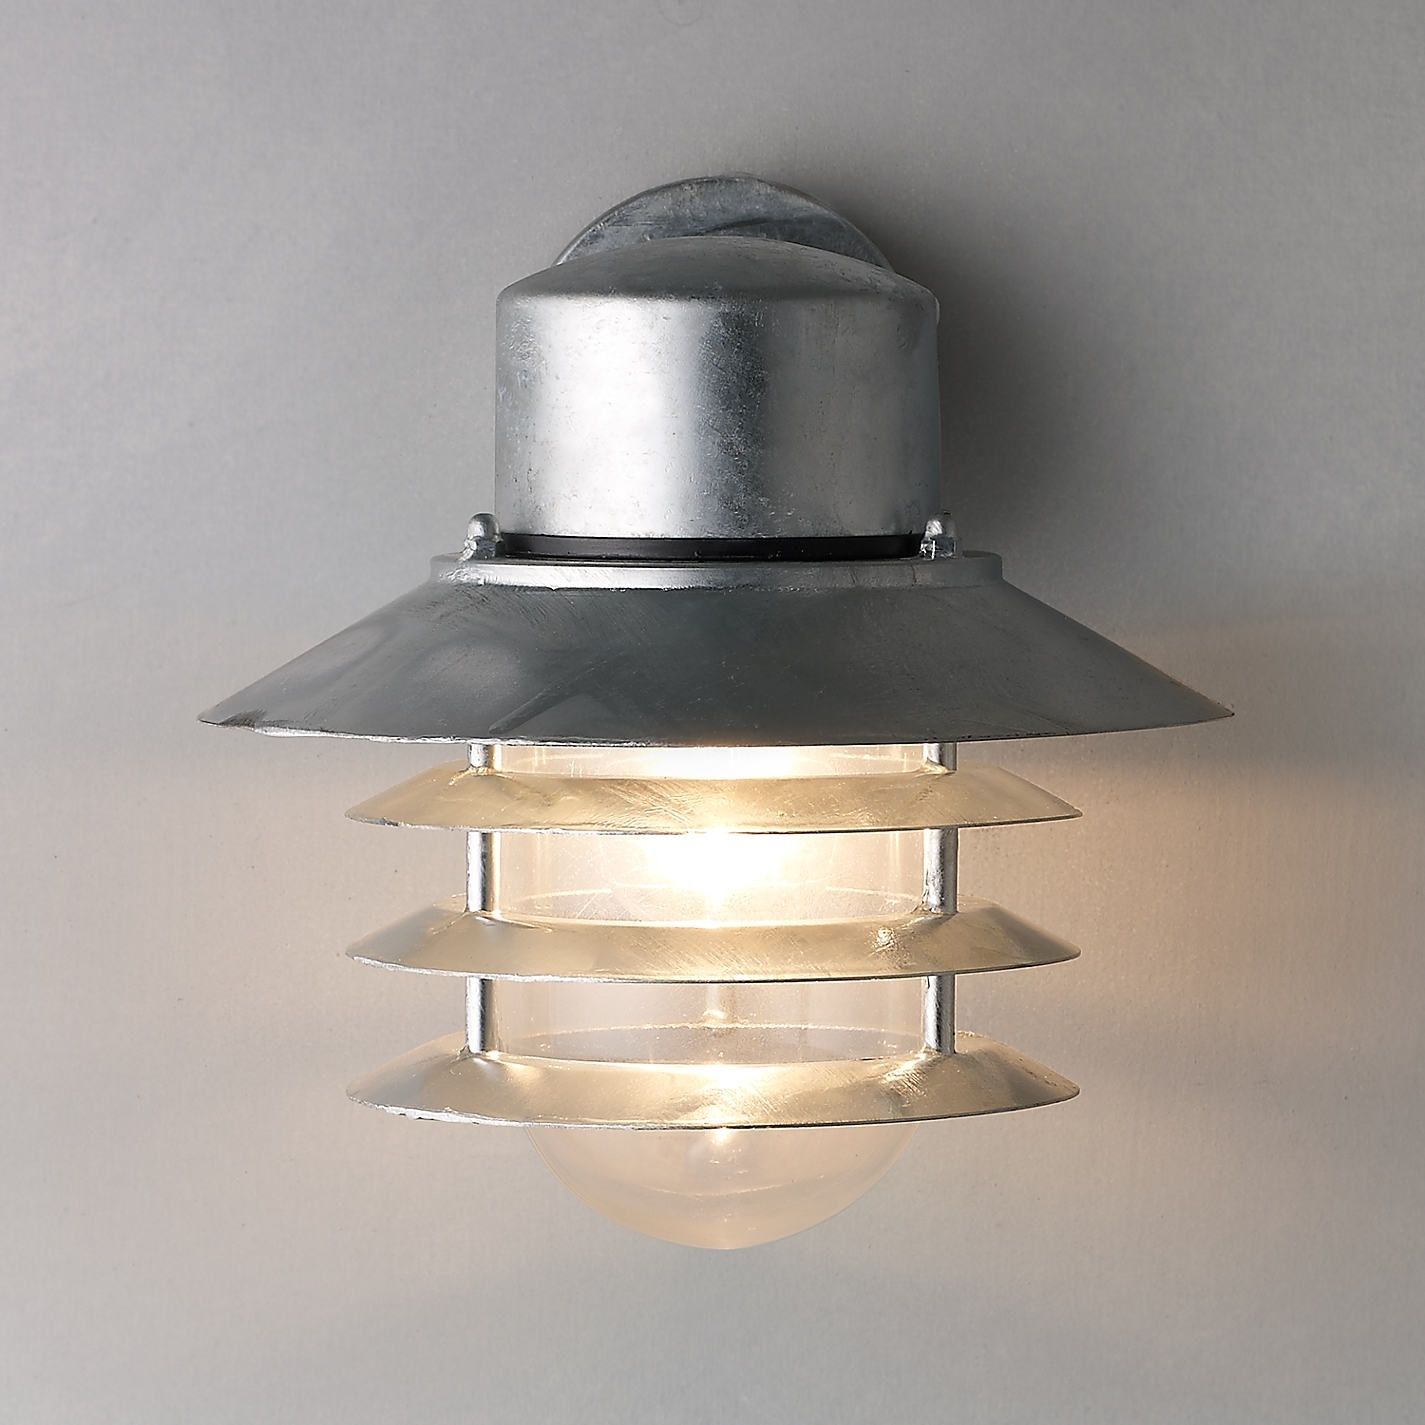 Outdoor Wall Light | Sorrentos Bistro Home Throughout Hanging Outdoor Sensor Lights (View 6 of 15)